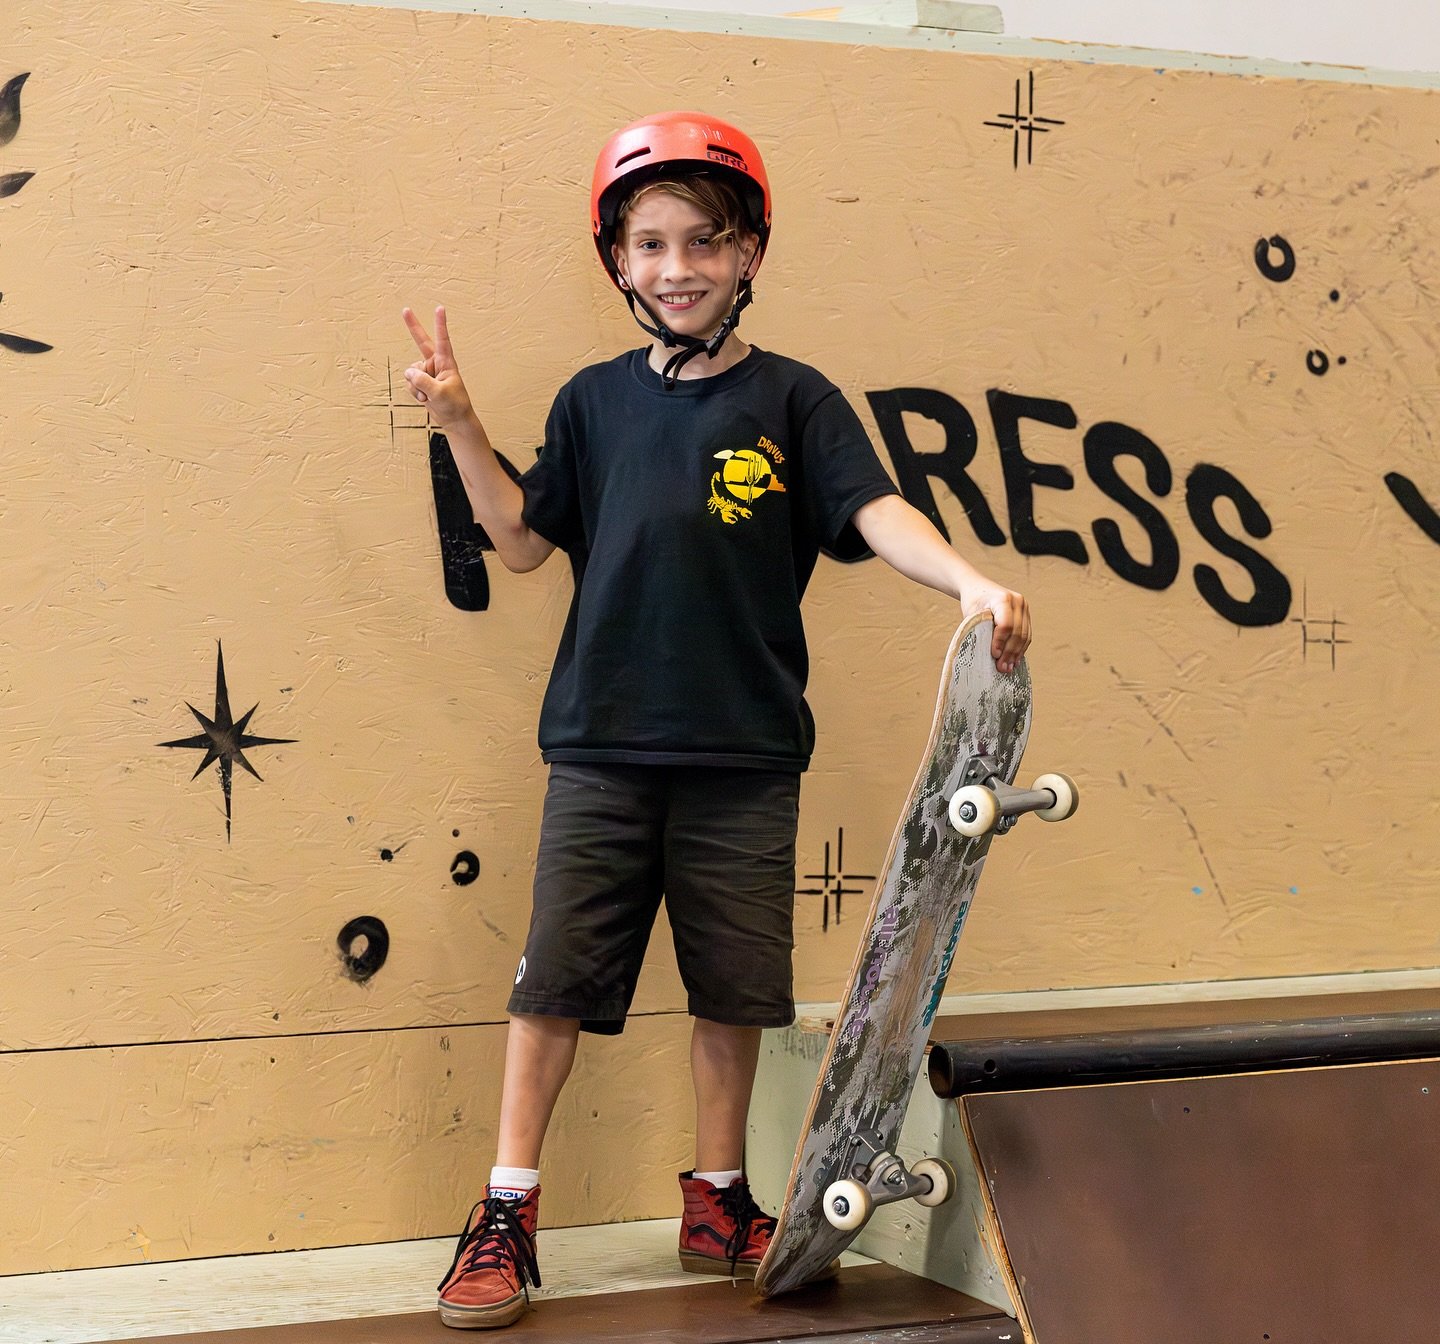 We are so excited to teach your kids how to Skateboard/improve their current level of skating next month! 

Classes are running for kids and teens; We&rsquo;ll guide them through age-appropriate classes with a dedicated coach, so they will be progres